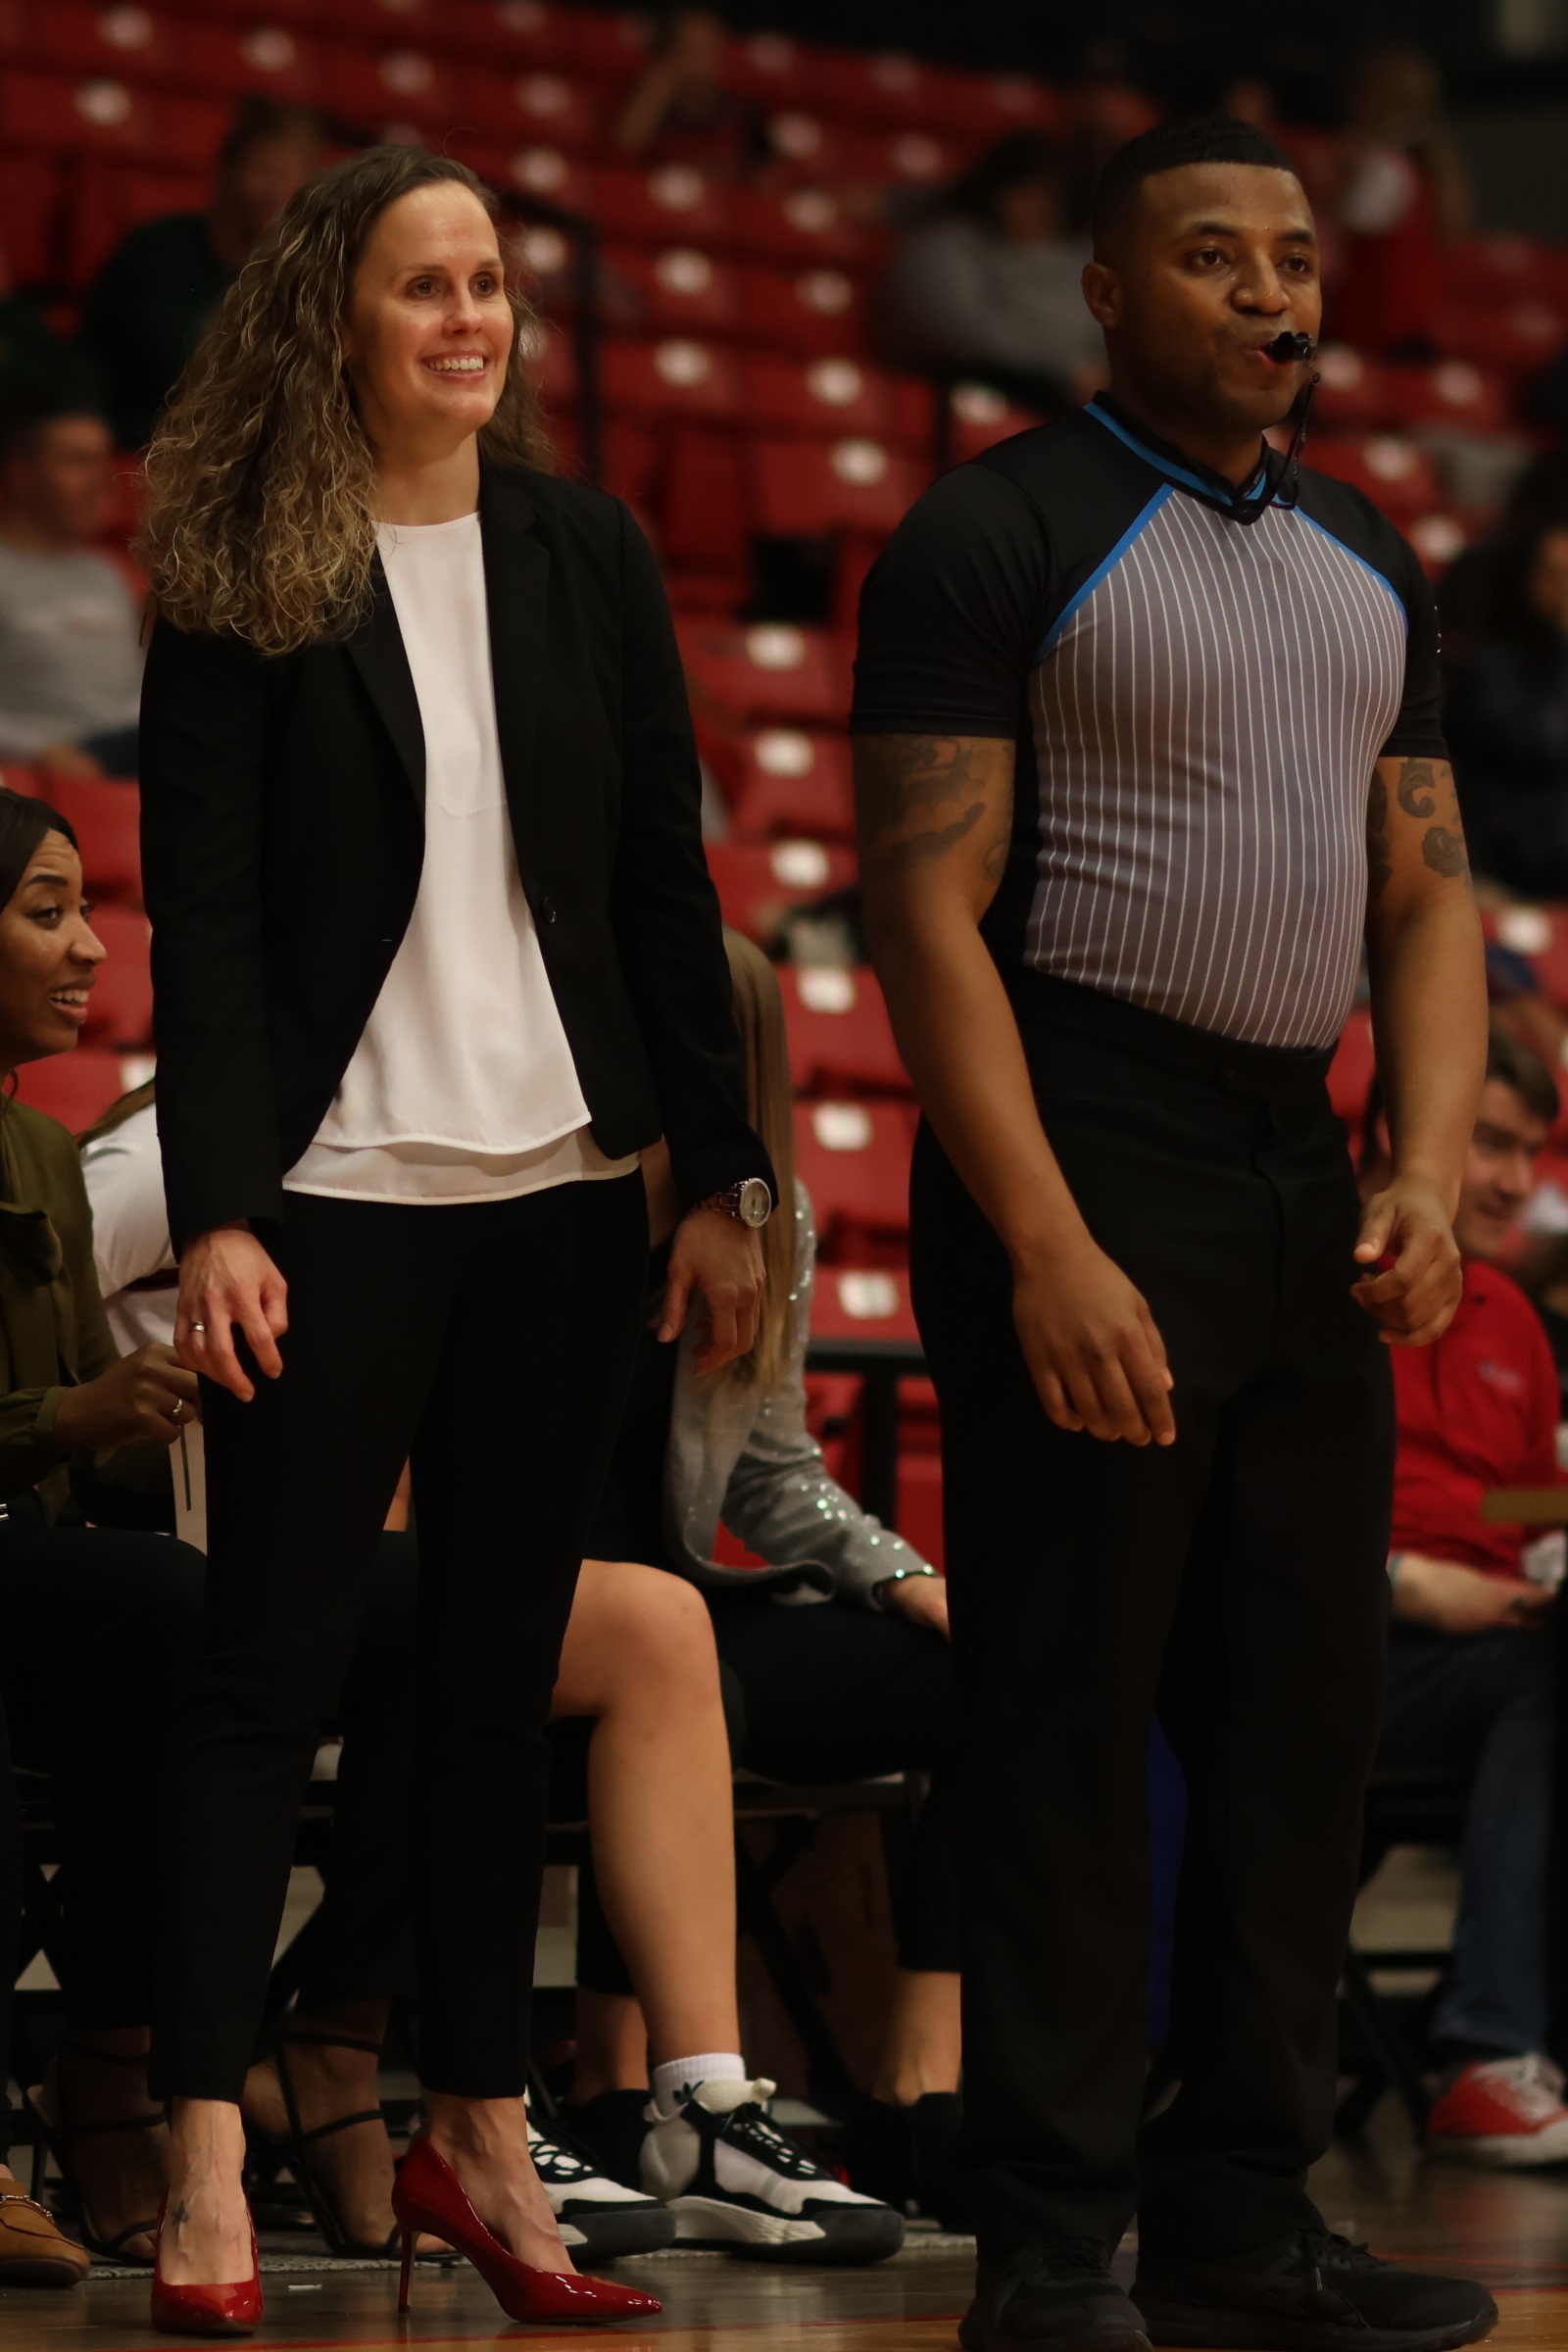 Drury women's basketball coach Kaci Bailey watches her team play during a game.